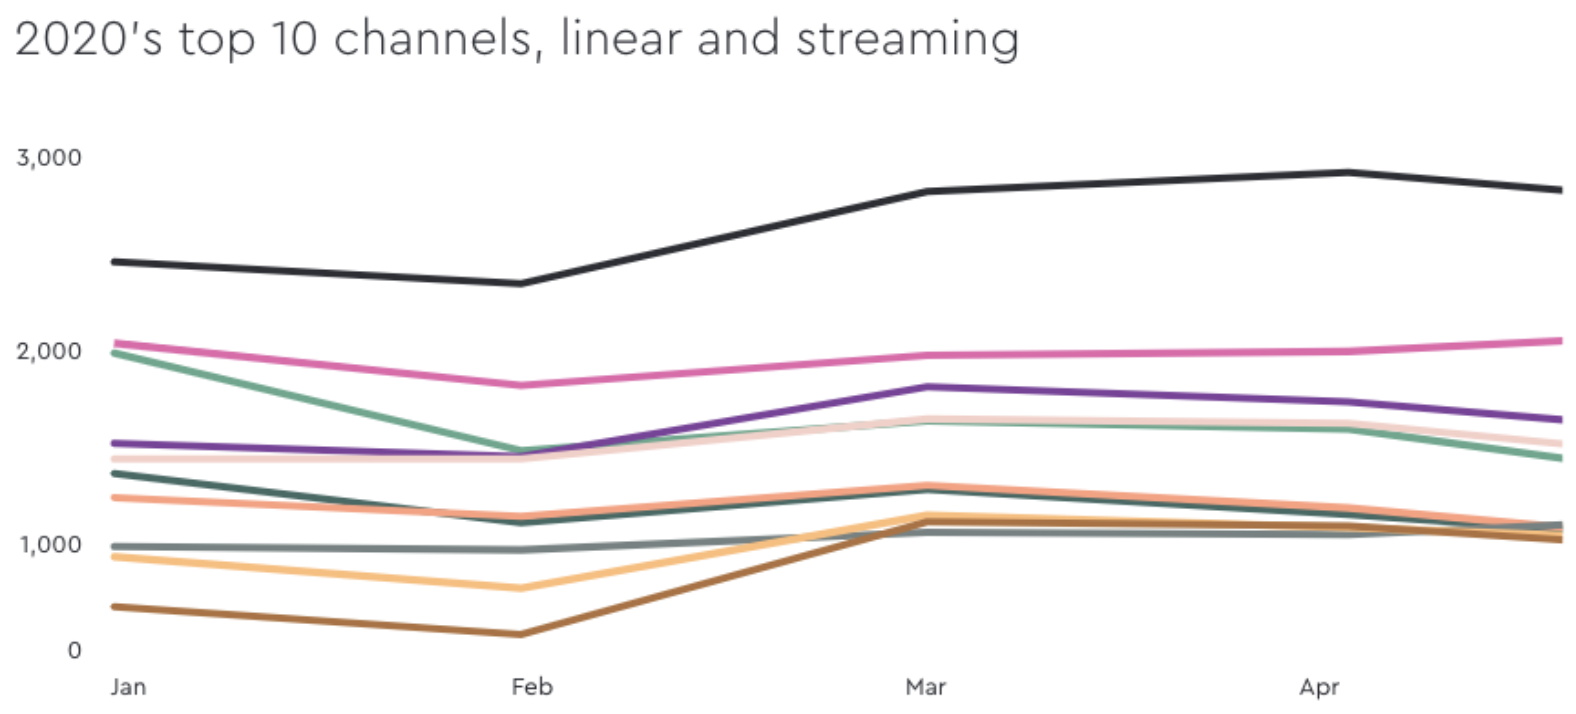 Chart showing 2020's top 10 channels, linear and streaming